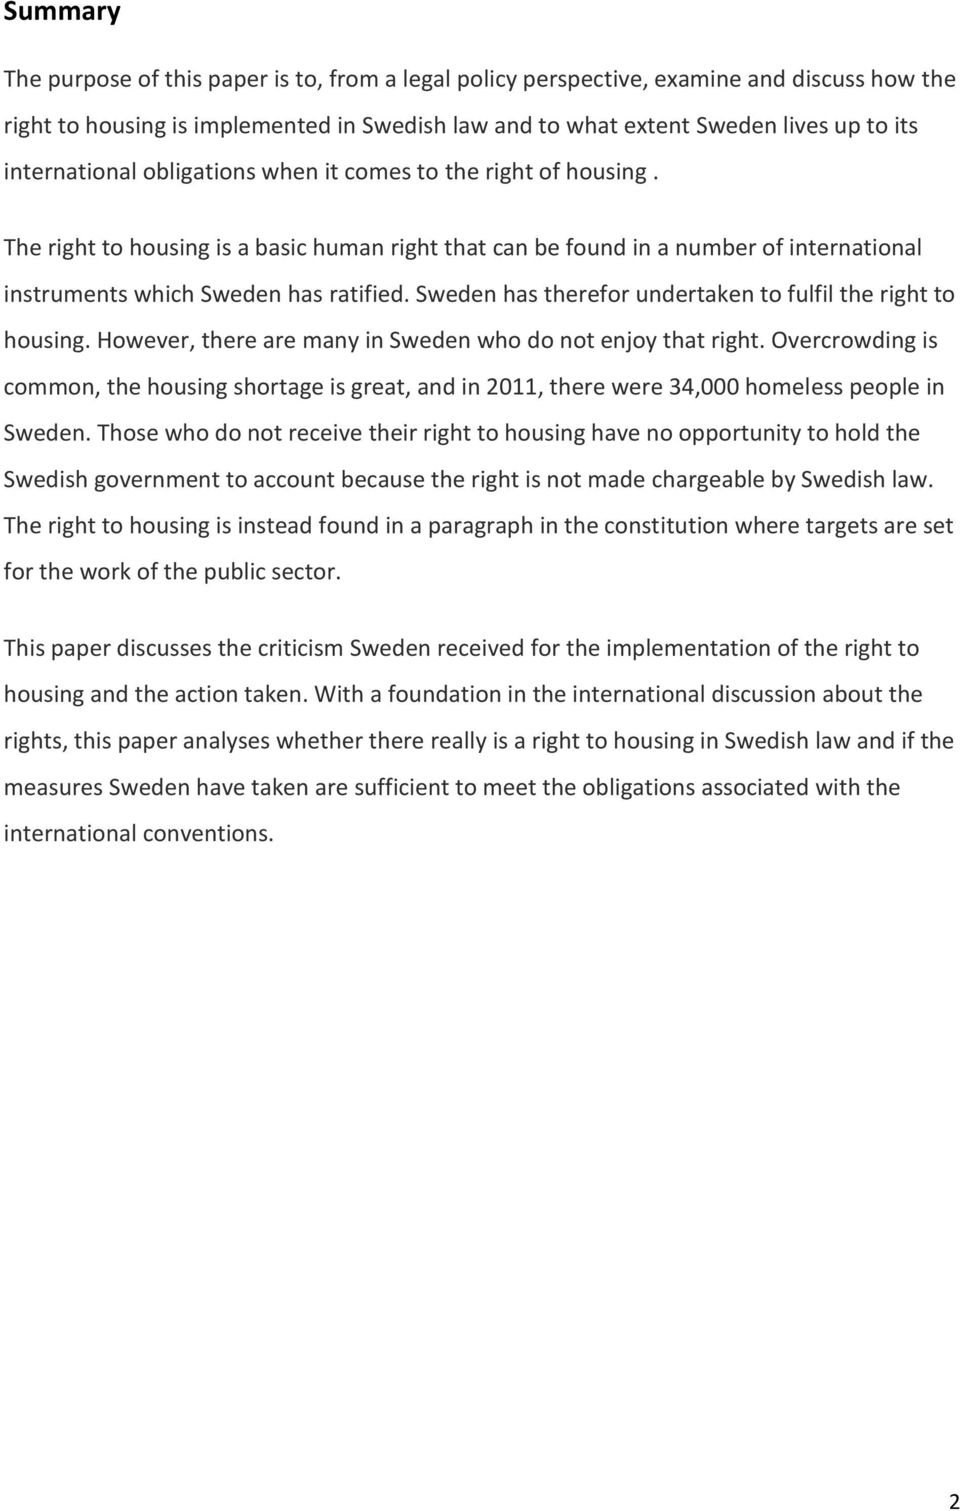 Sweden has therefor undertaken to fulfil the right to housing. However, there are many in Sweden who do not enjoy that right.